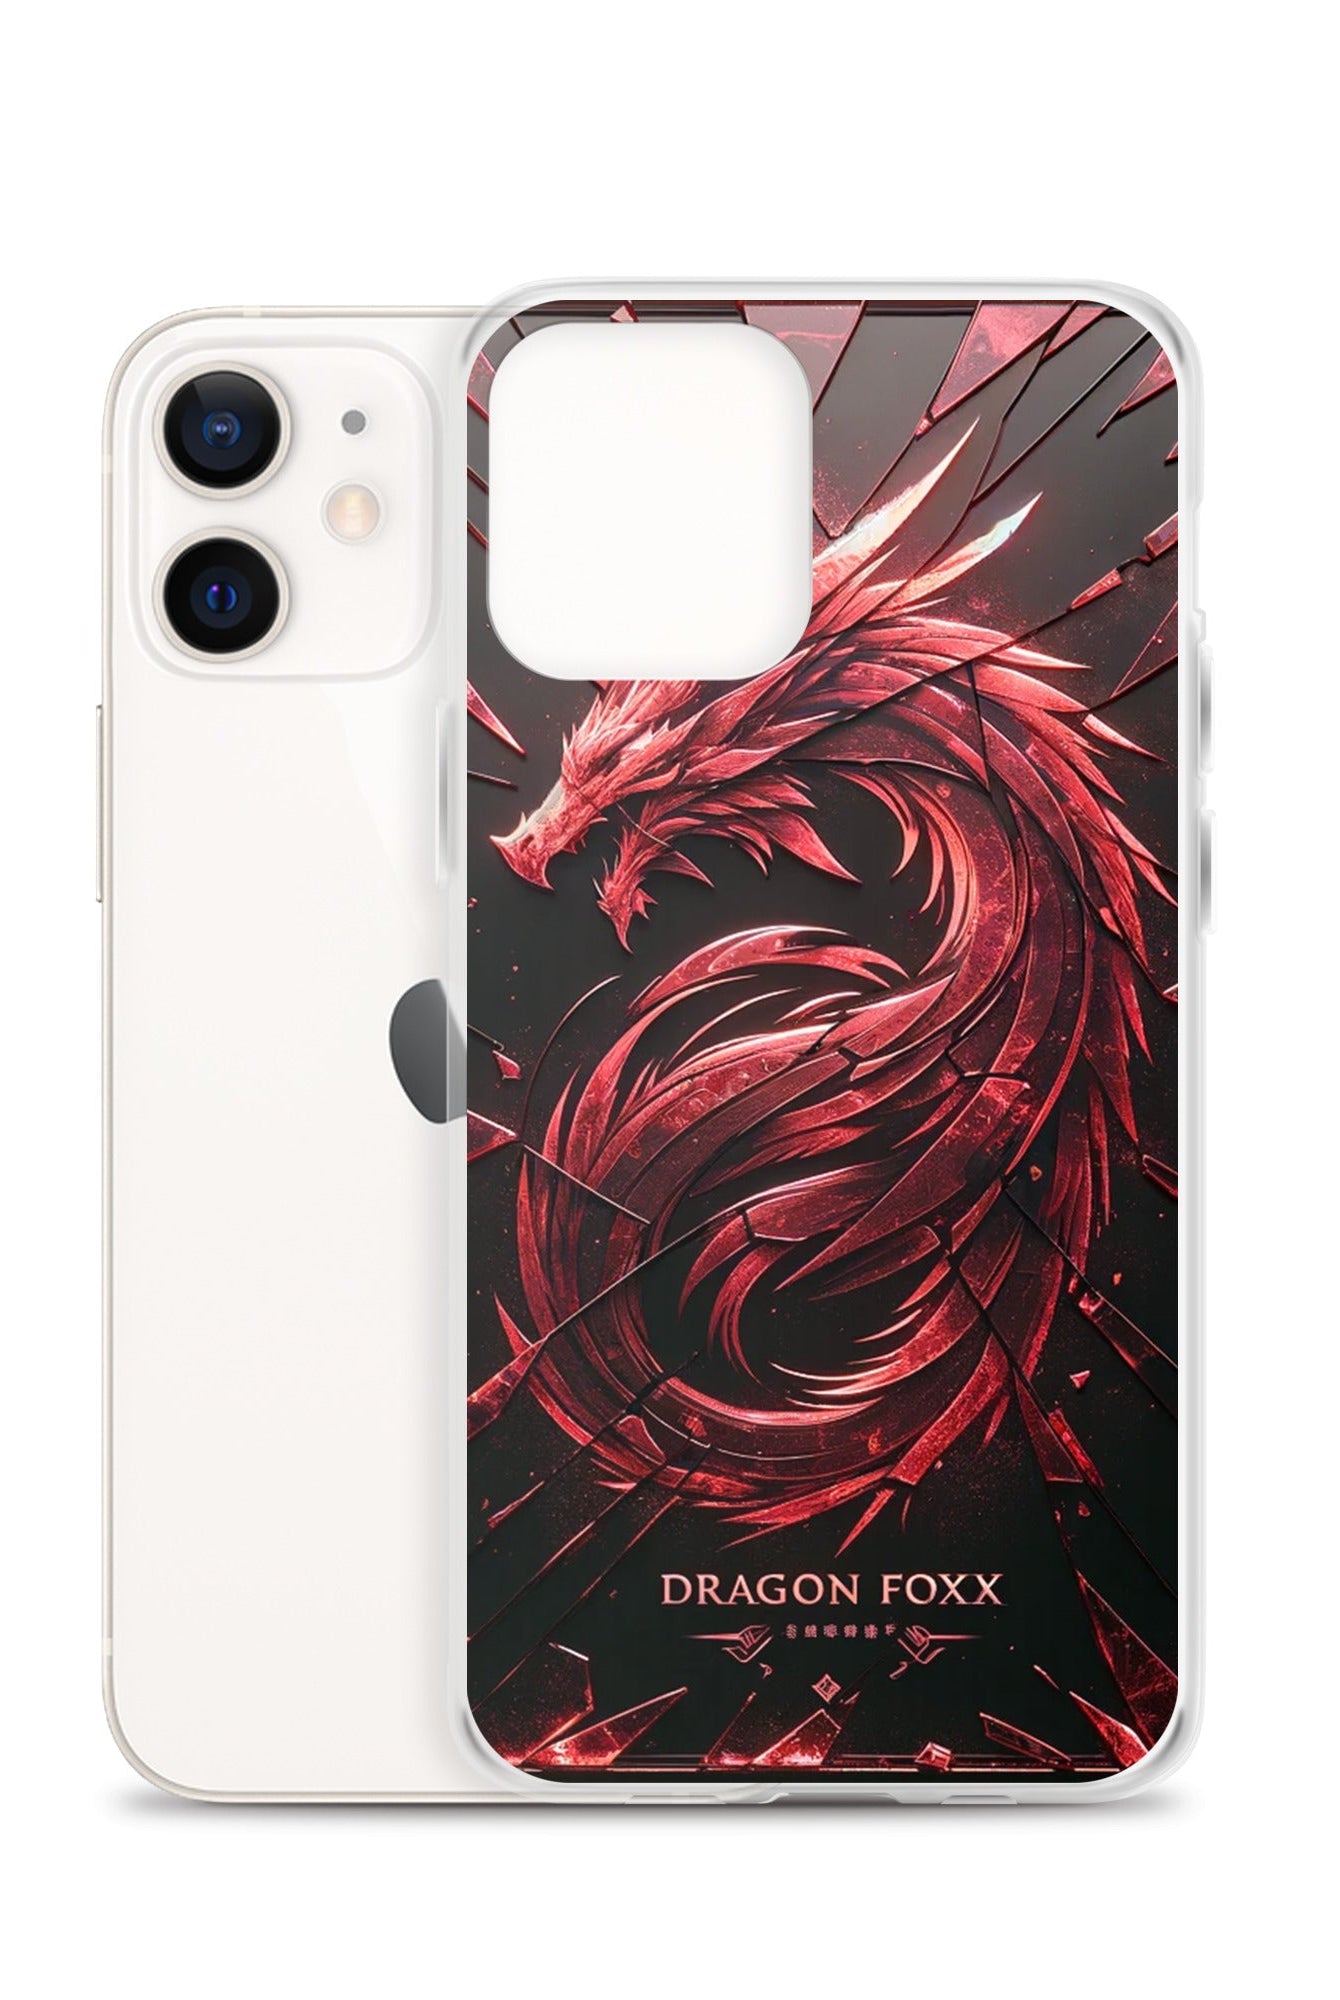 DRAGON FOXX™ Red Dragon Phone Case for iPhone® - Phone Case for iPhone® - DRAGON FOXX™ - DRAGON FOXX™ Red Dragon Phone Case for iPhone® - 7805351_11704 - iPhone 12 - Red/Black/Clear - Accessories - Dragon Foxx™ - DRAGON FOXX™ Phone Case for iPhone®